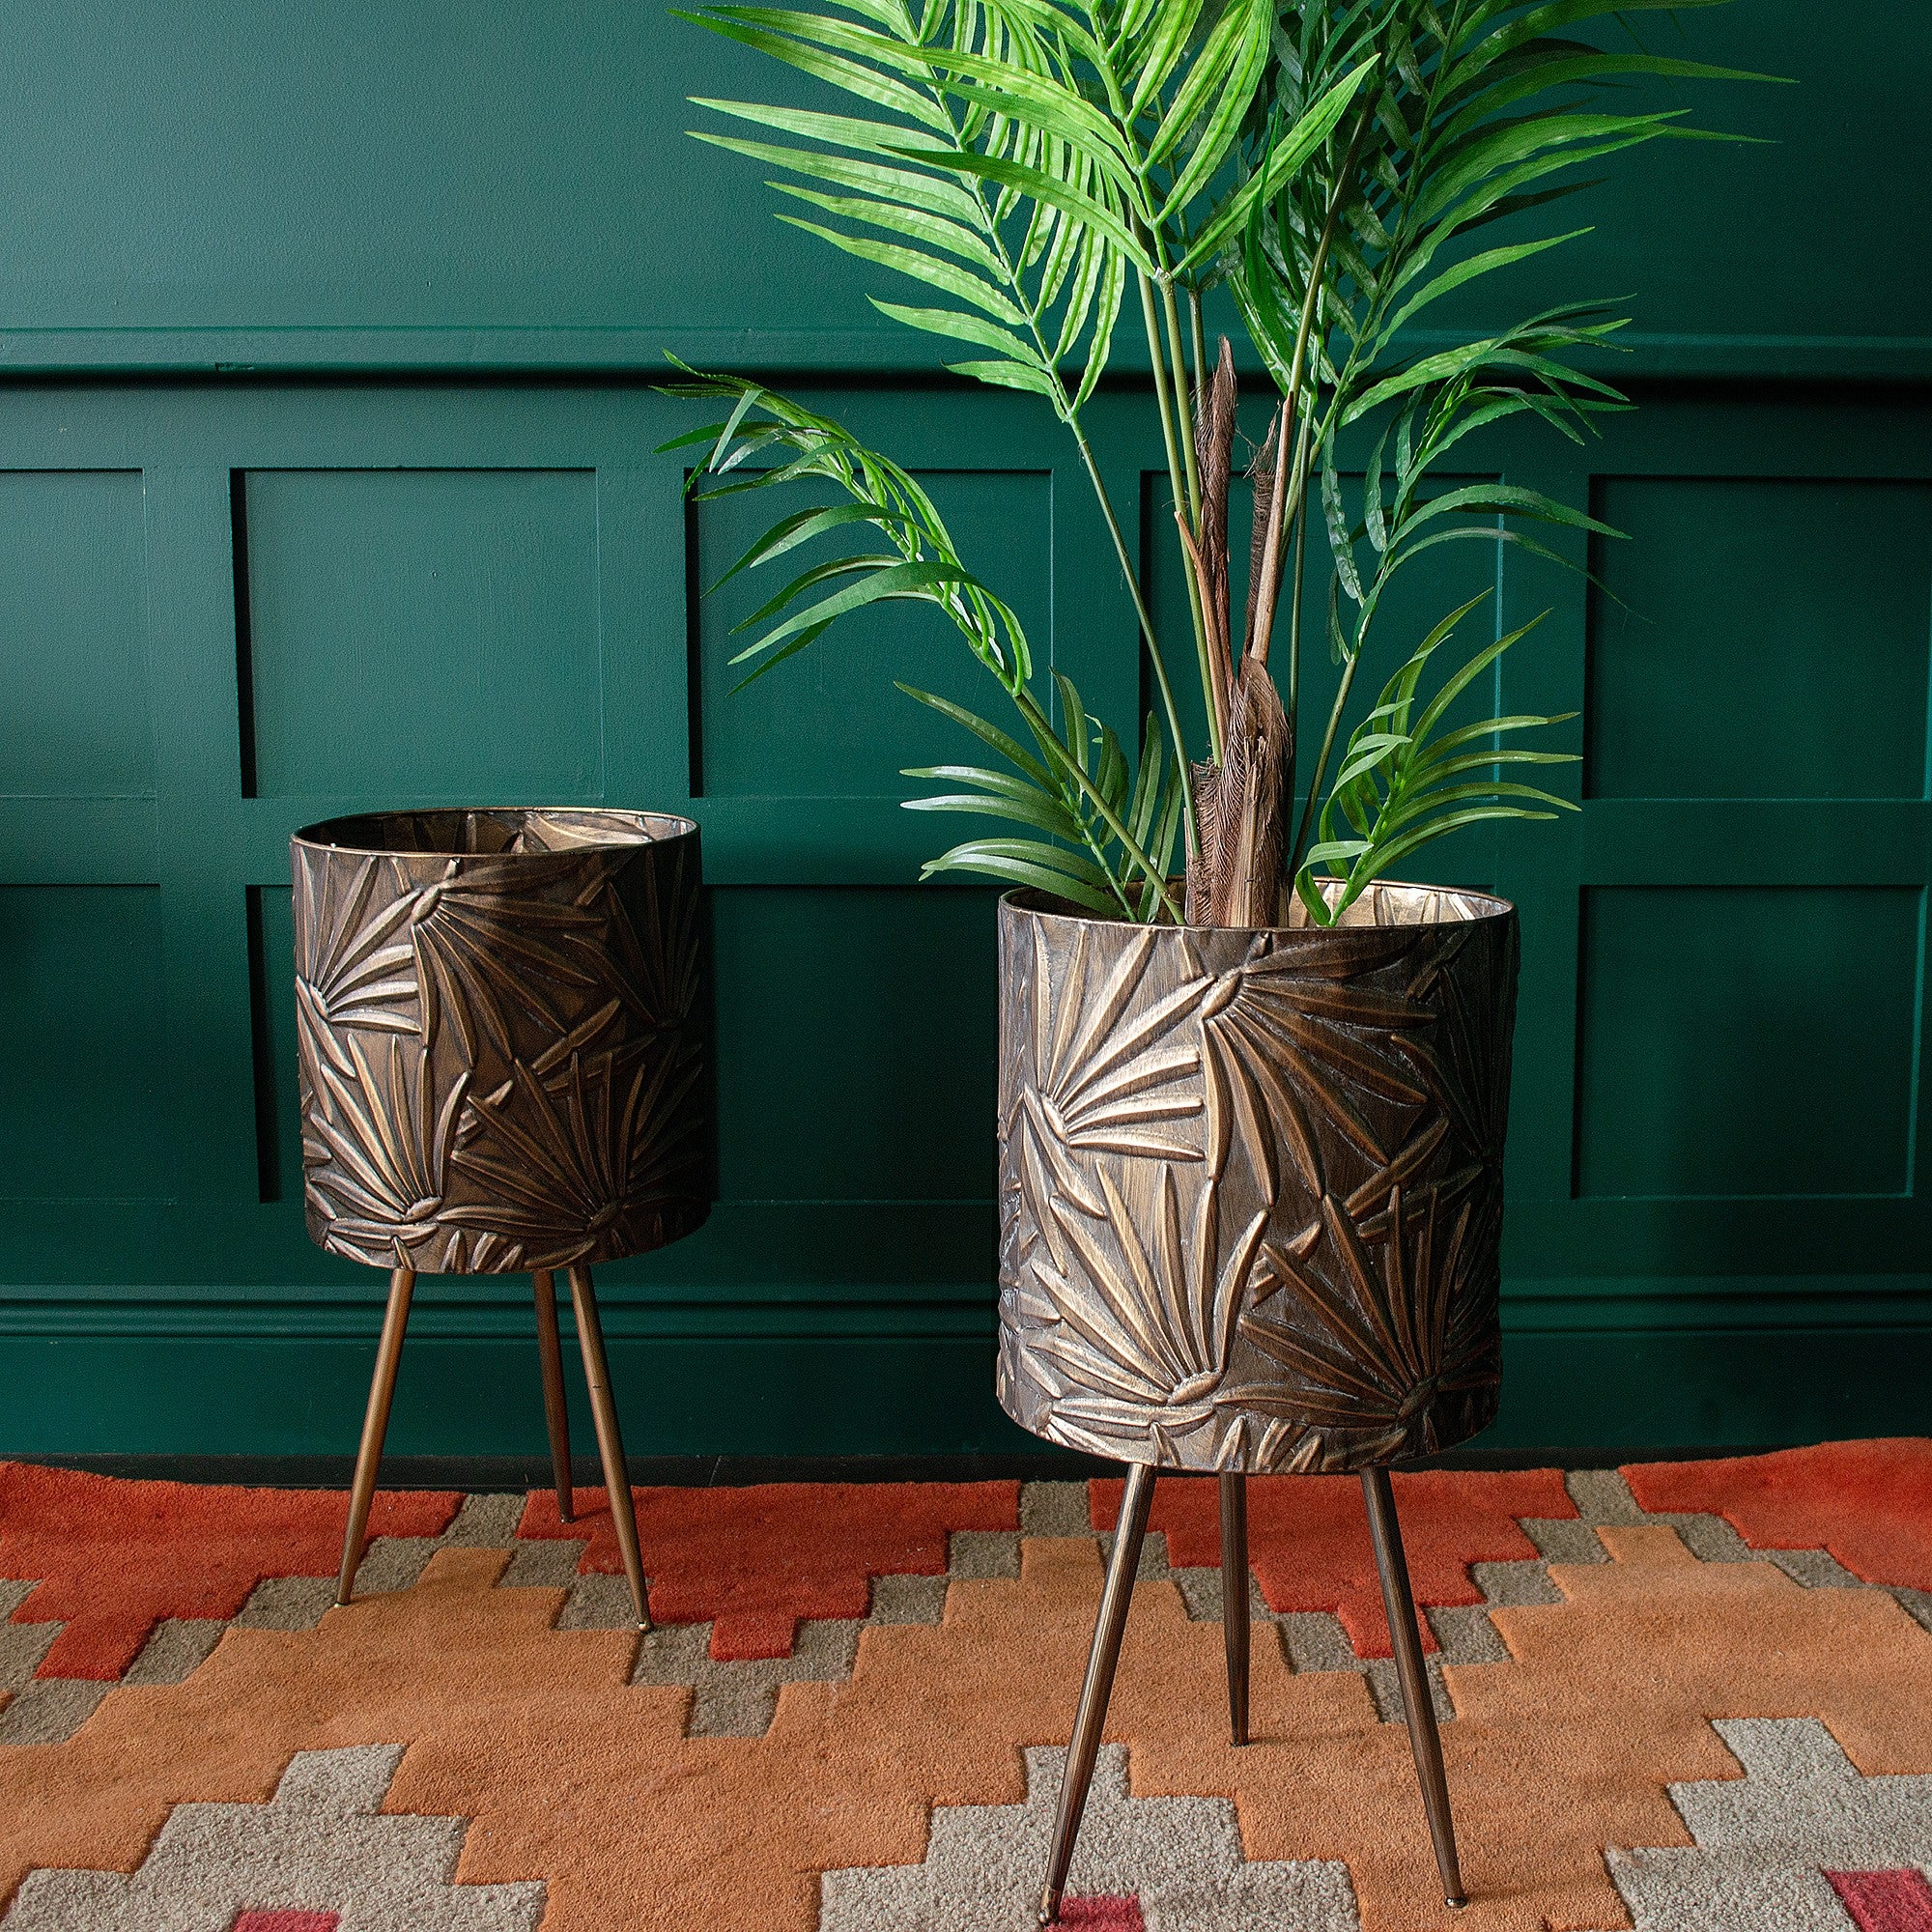 Bronze Embossed Planter on Stand